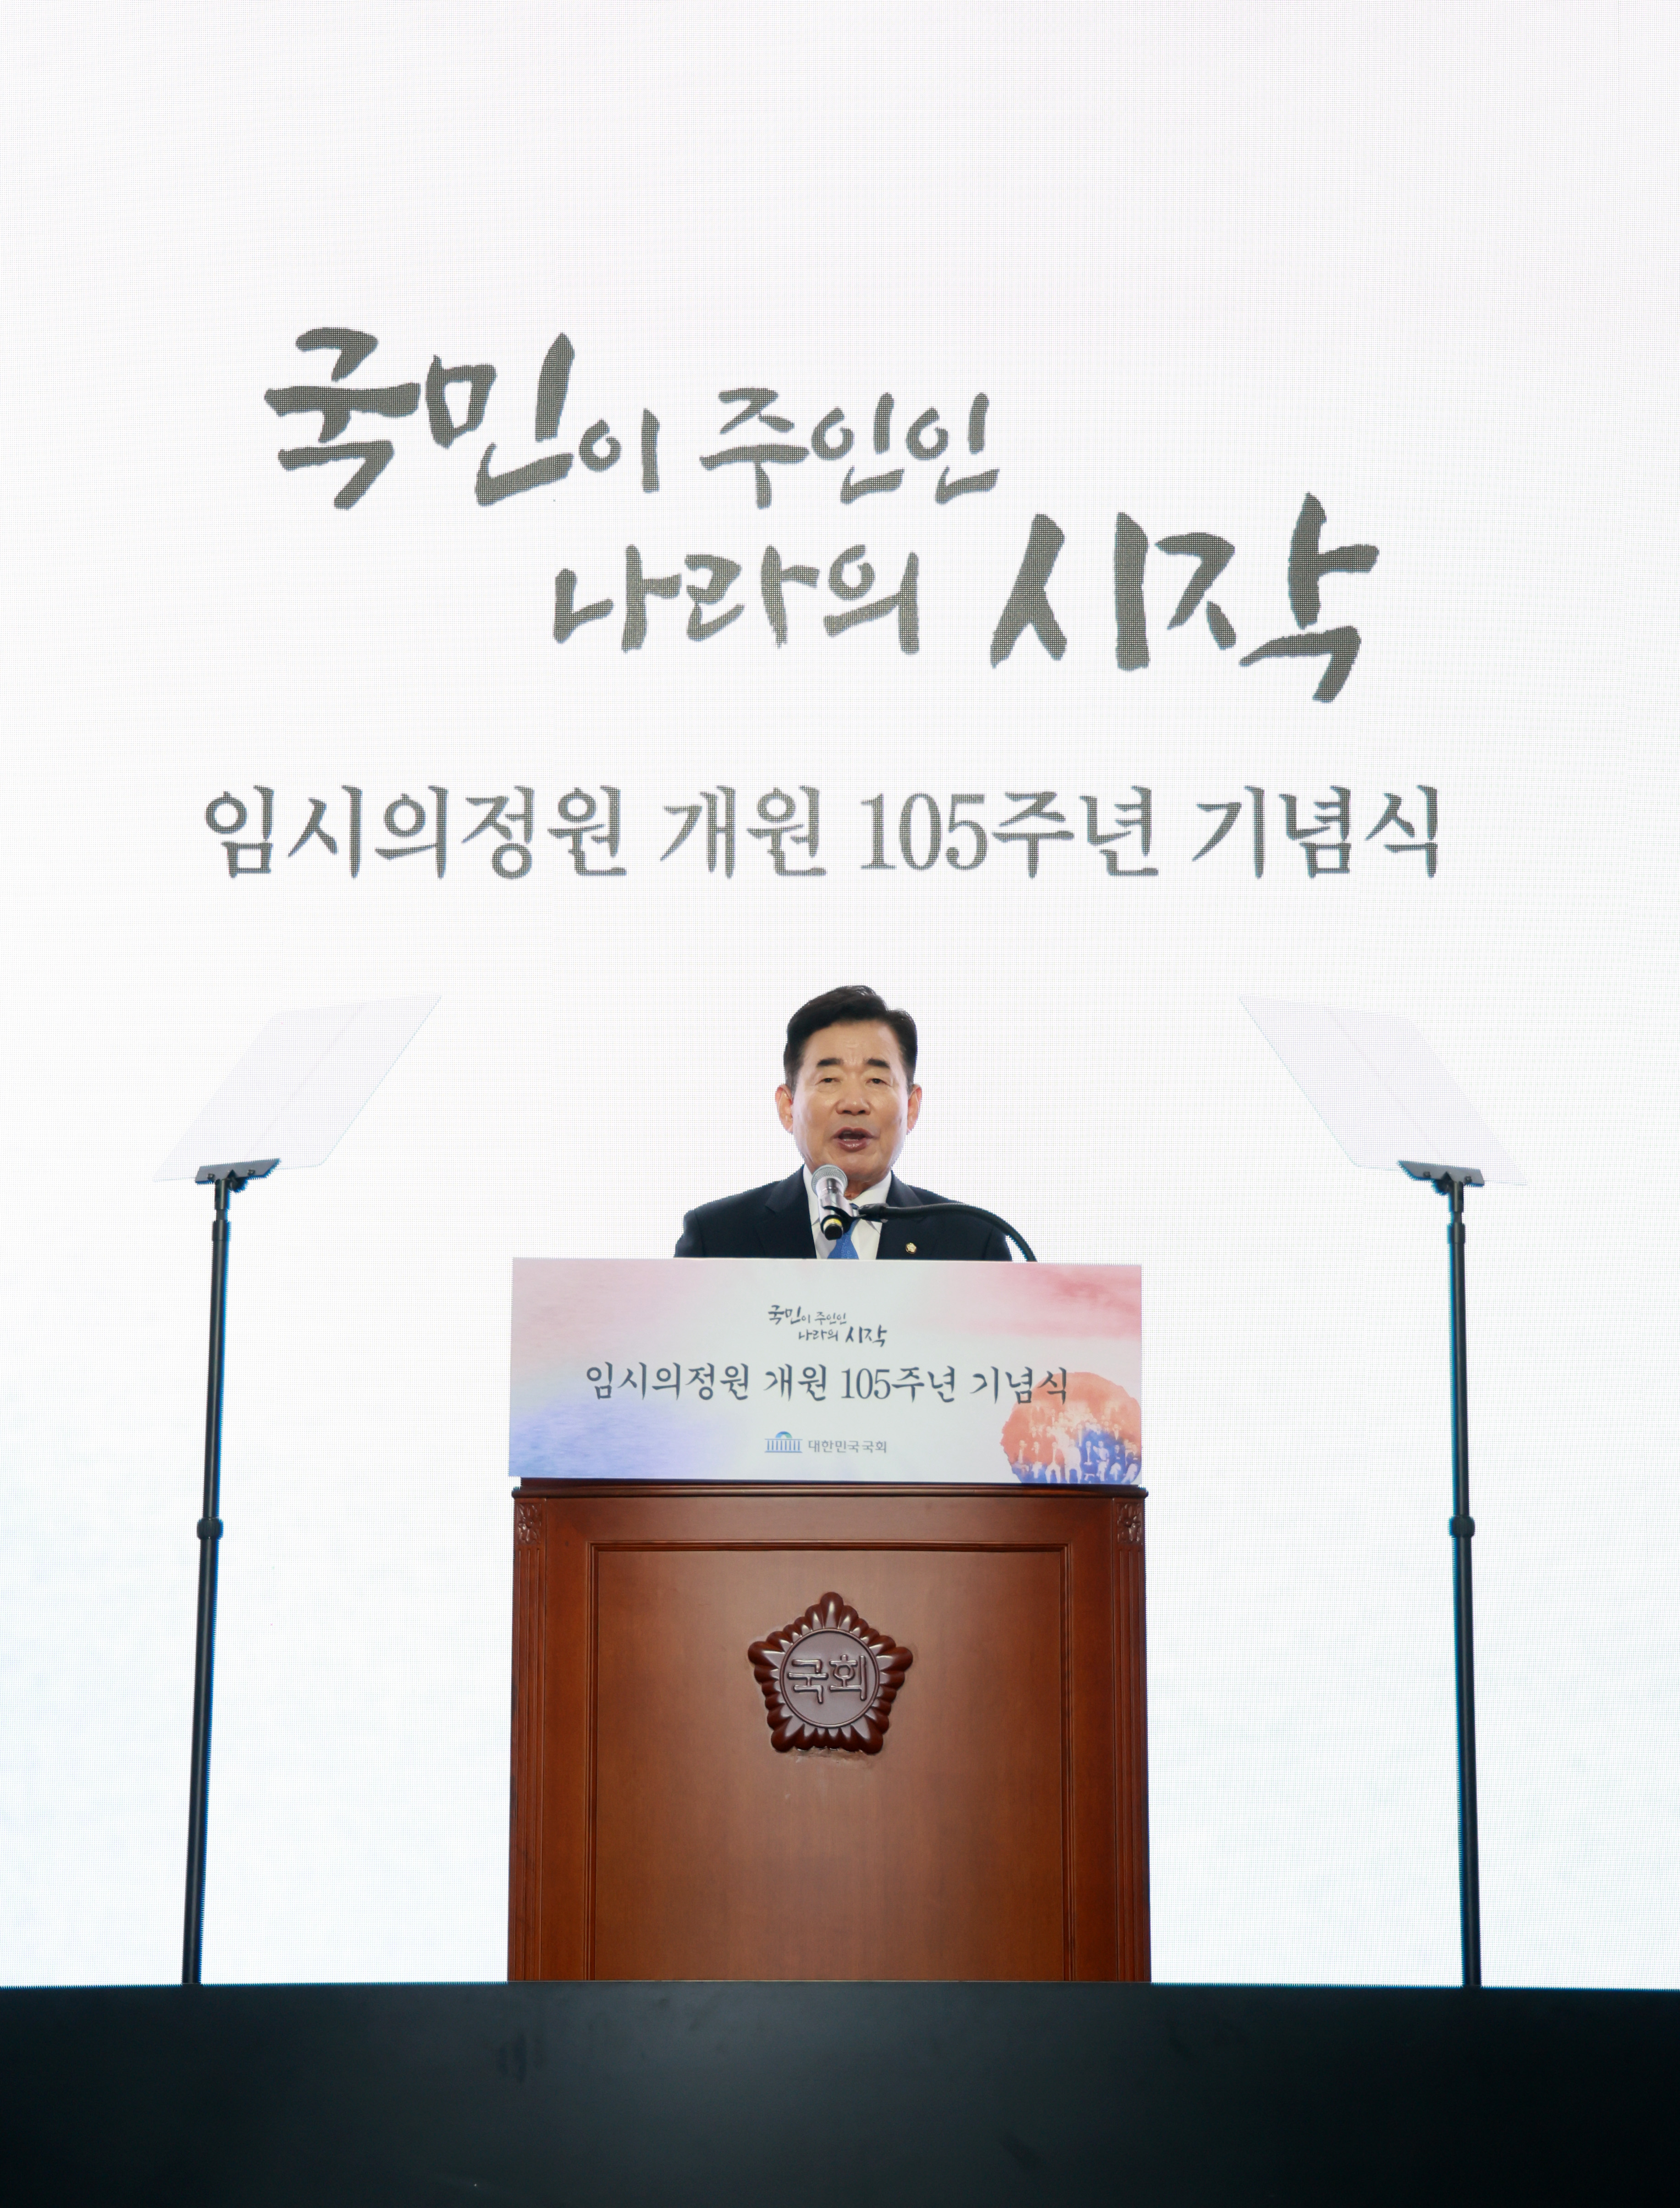 Speaker urges &ldquo;national unity&rdquo; at 105th anniv. of the Provisional Legislative Assembly opening